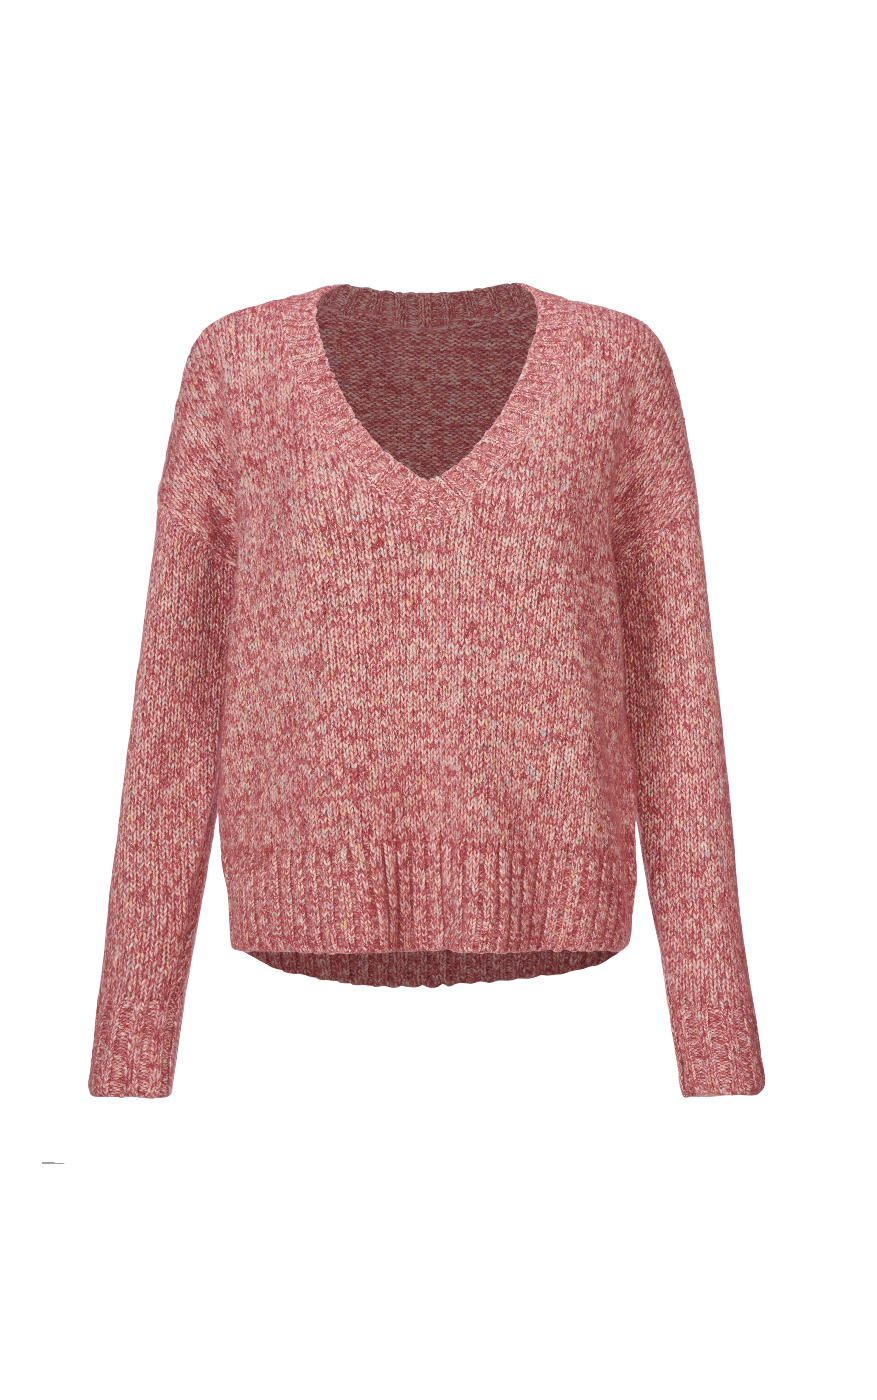 Sweaters - Cardigans, Pullovers For Women| cabi clothing